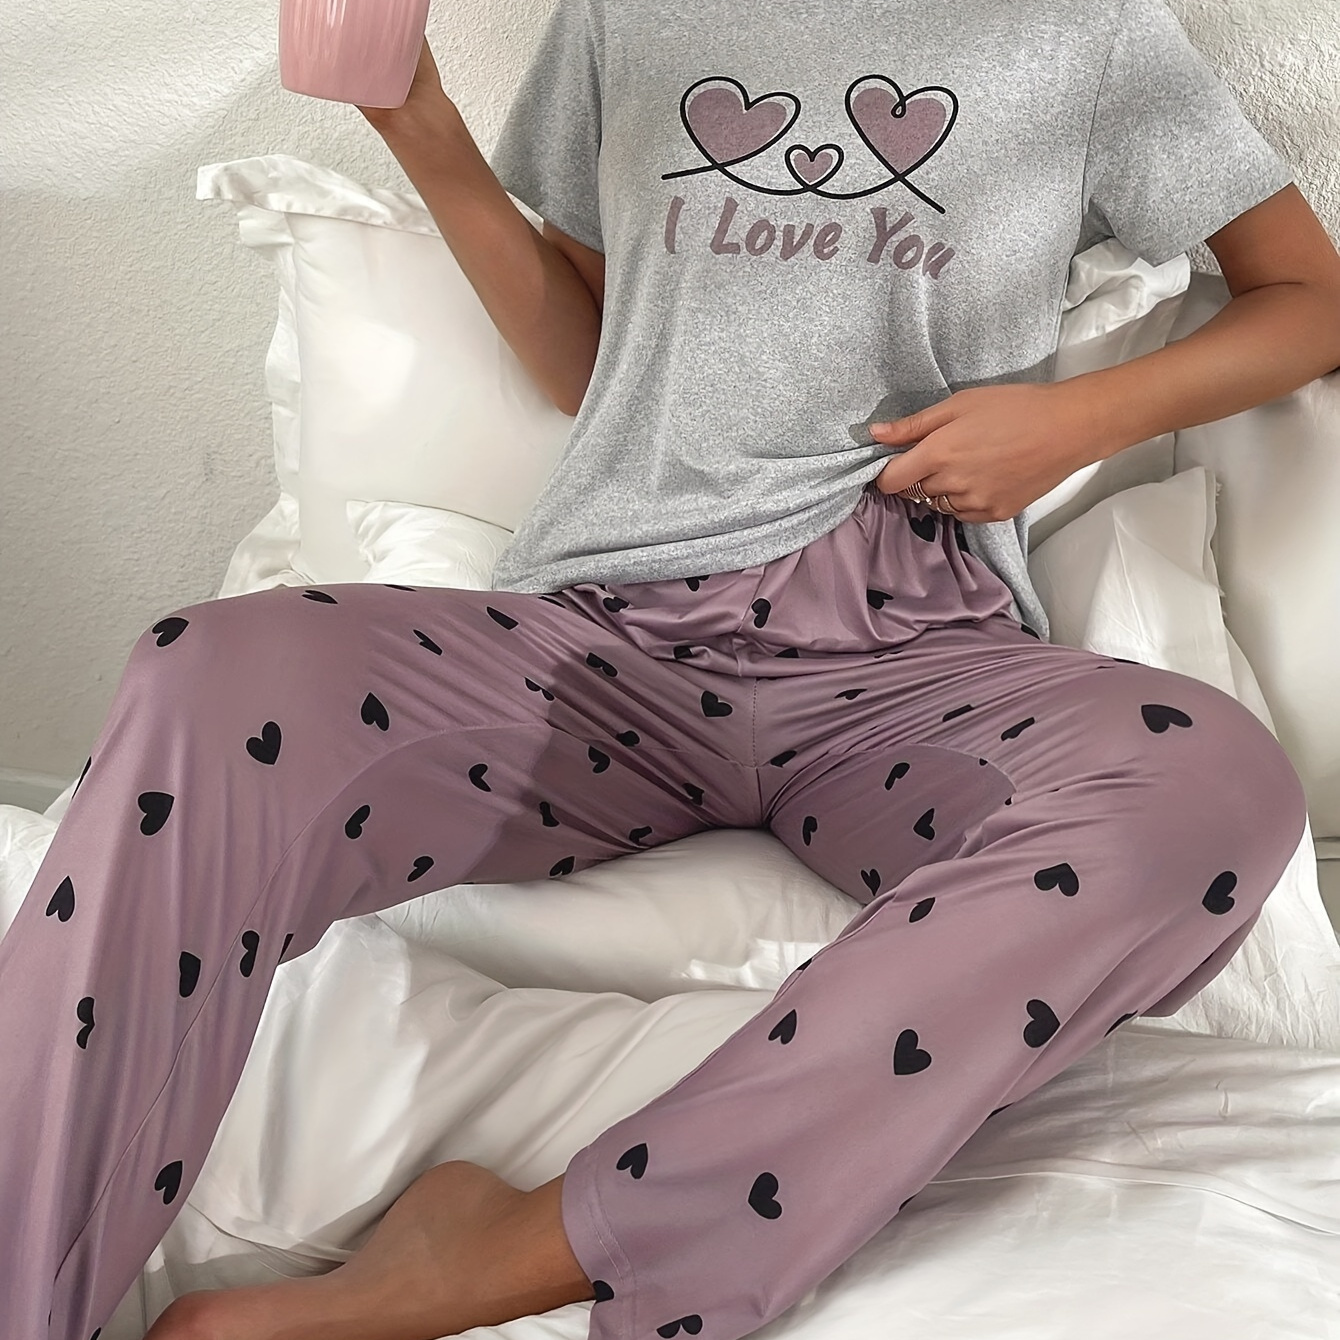 

Women's Heart & Slogan Print Casual Pajama Set, Short Sleeve Round Neck Top & Pants, Comfortable Relaxed Fit